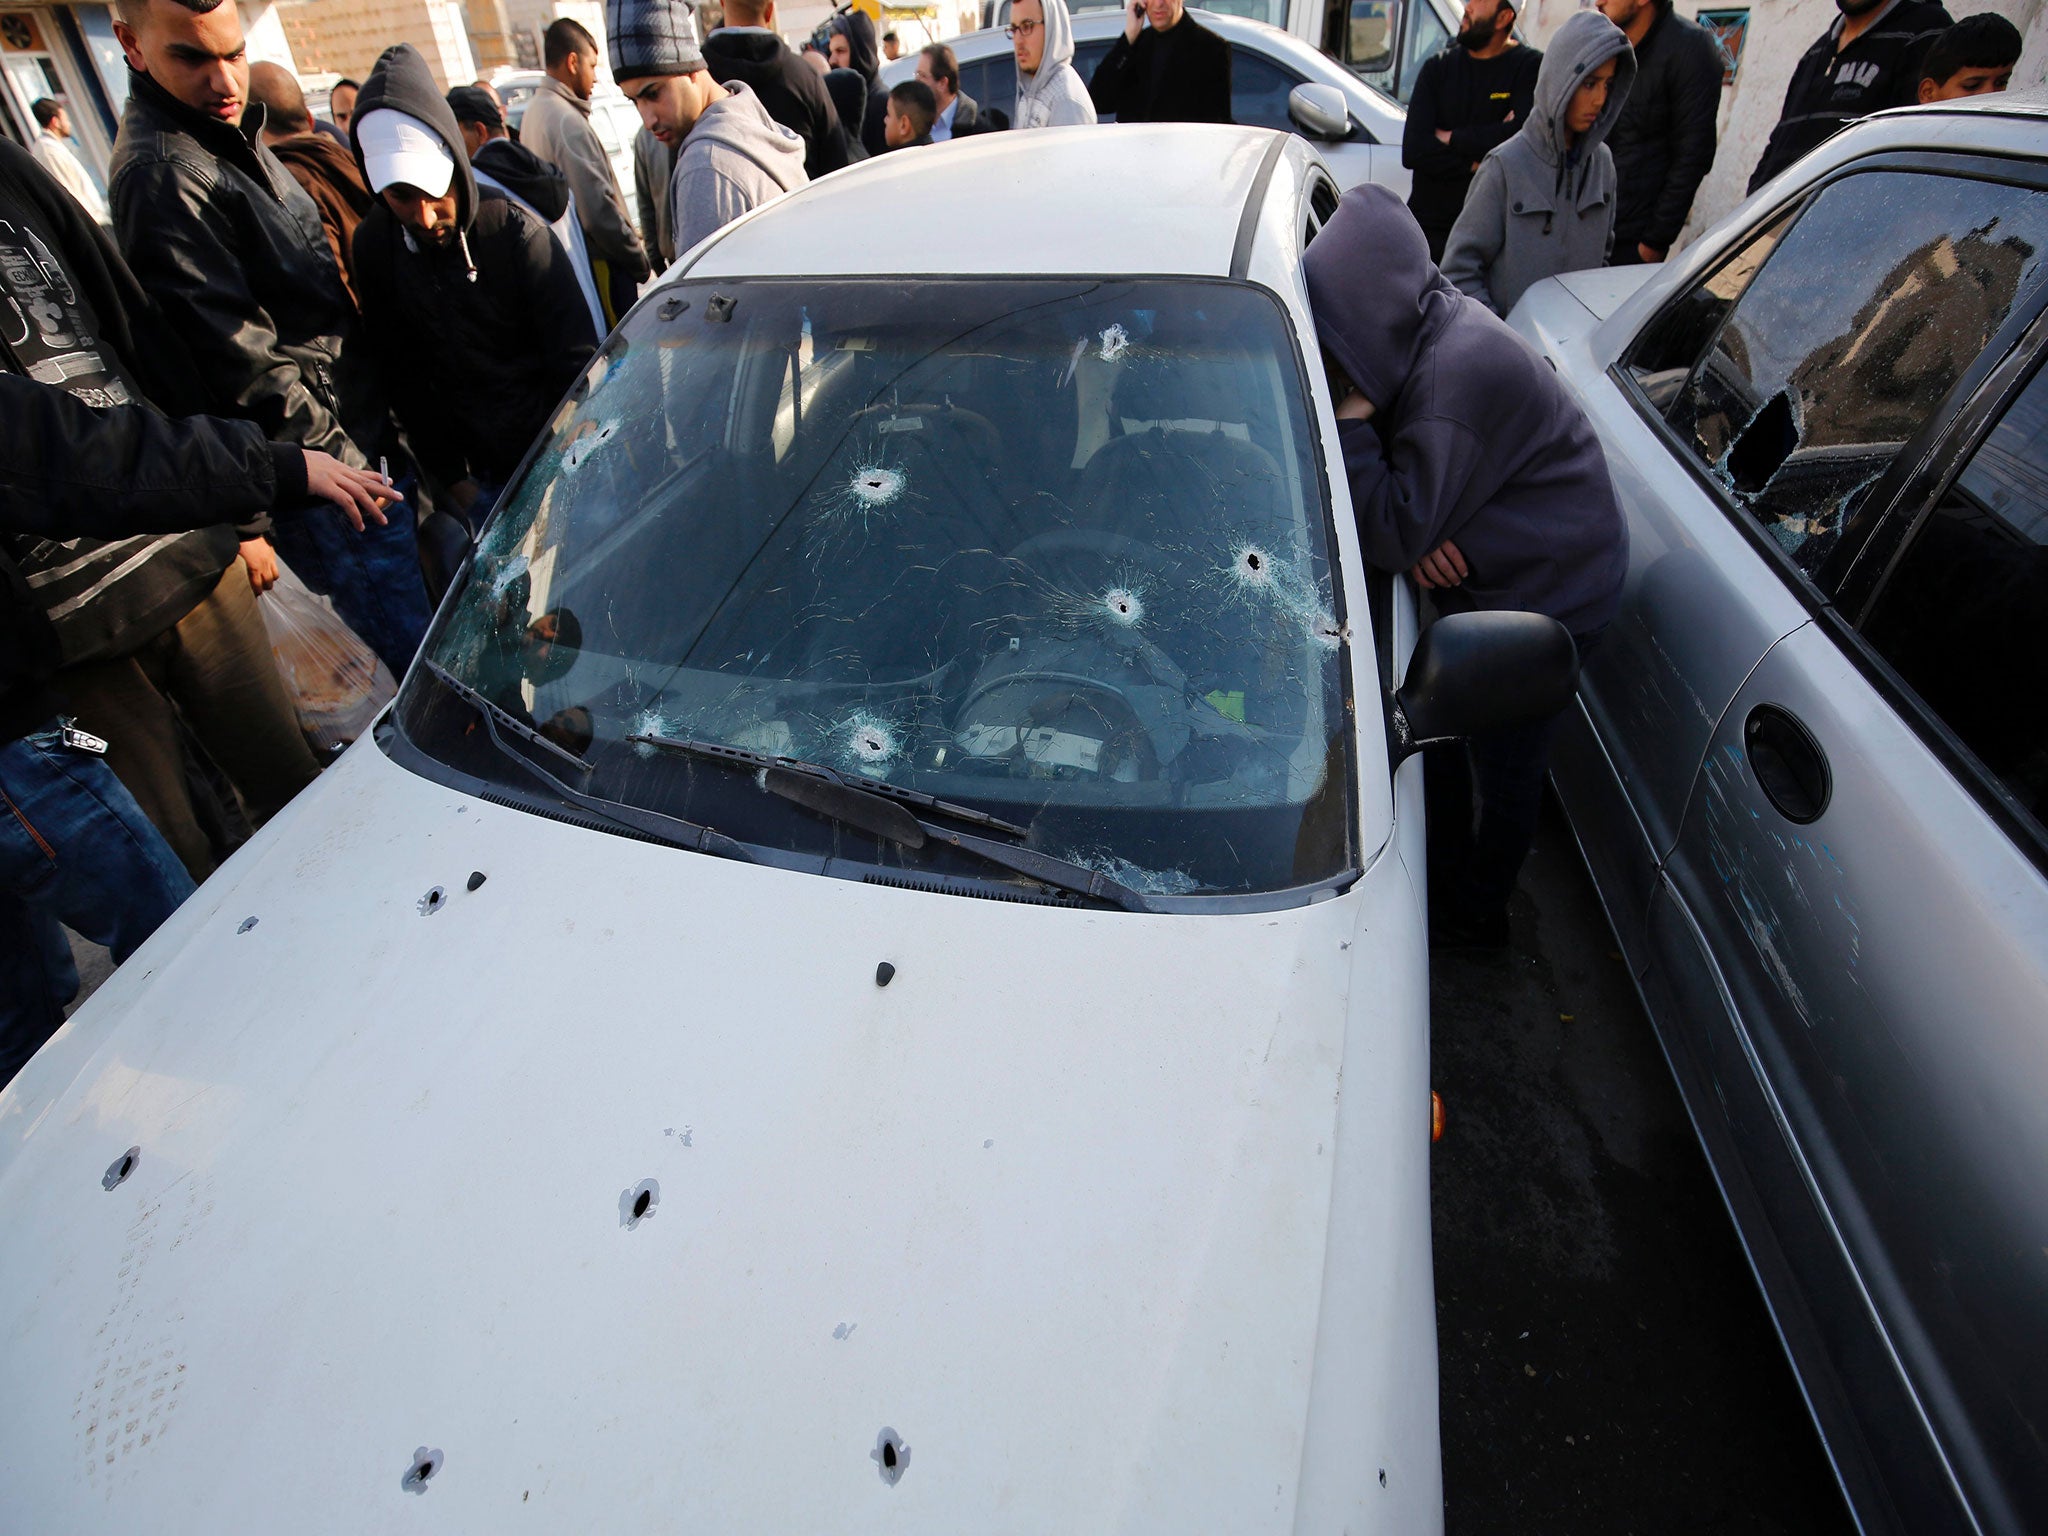 Palestinians stand next to a car, used by Palestinians in an attempted ramming attack against Israeli soldiers, in the Qalandia refugee camp near the West Bank city of Ramallah on December 16, 2015.